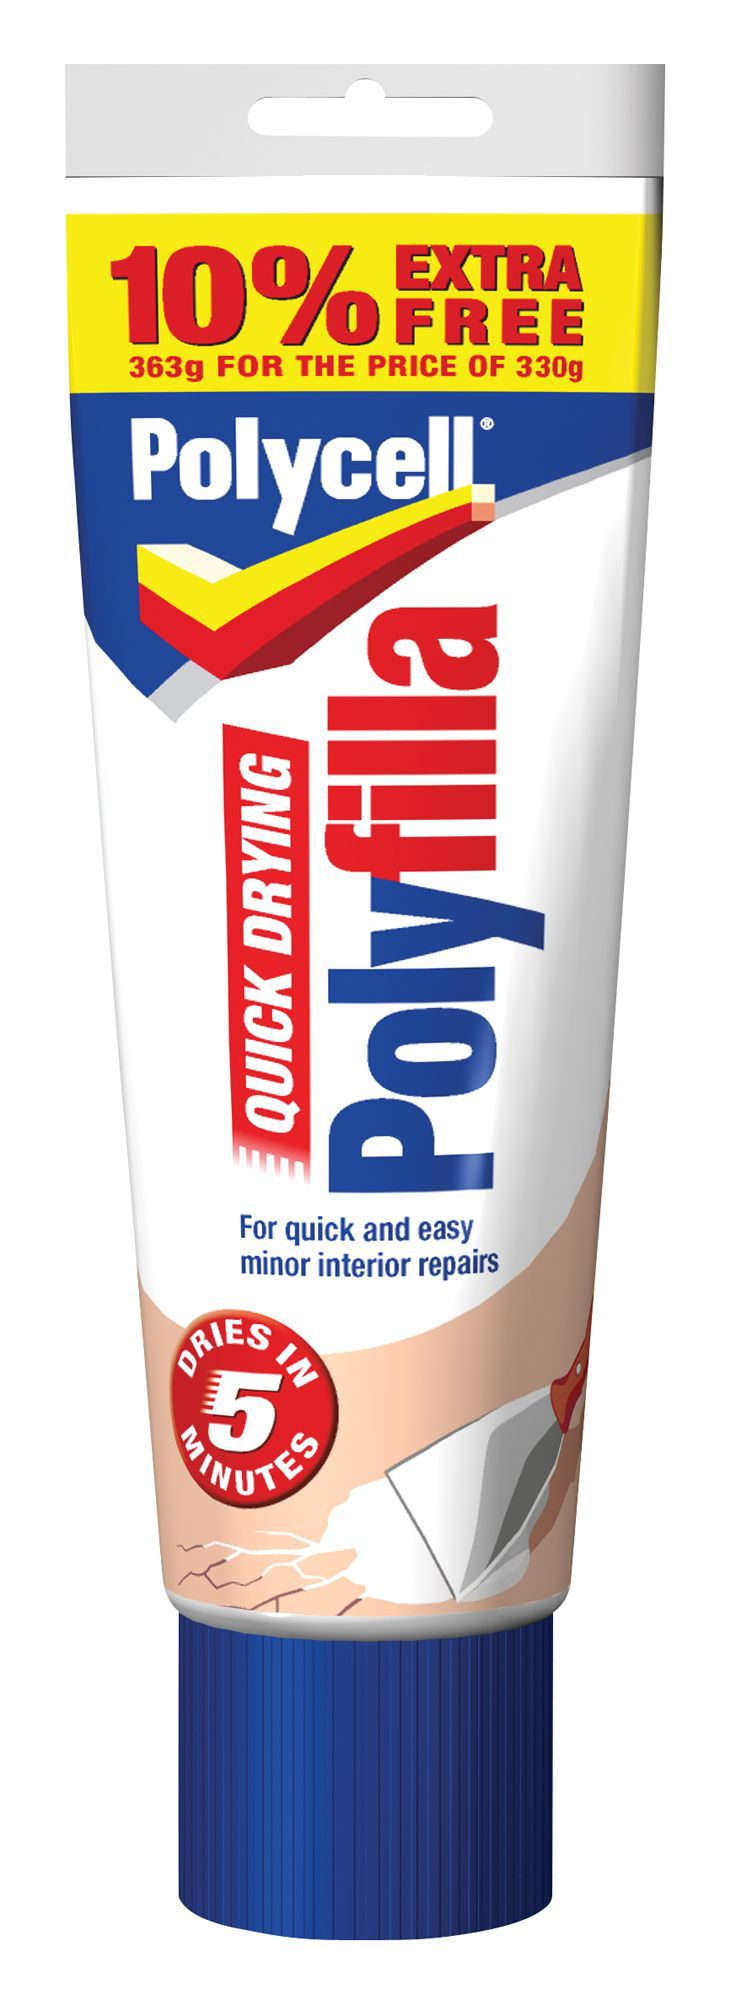 Can You Paint Over Polycell Crack Free Ceiling Paint